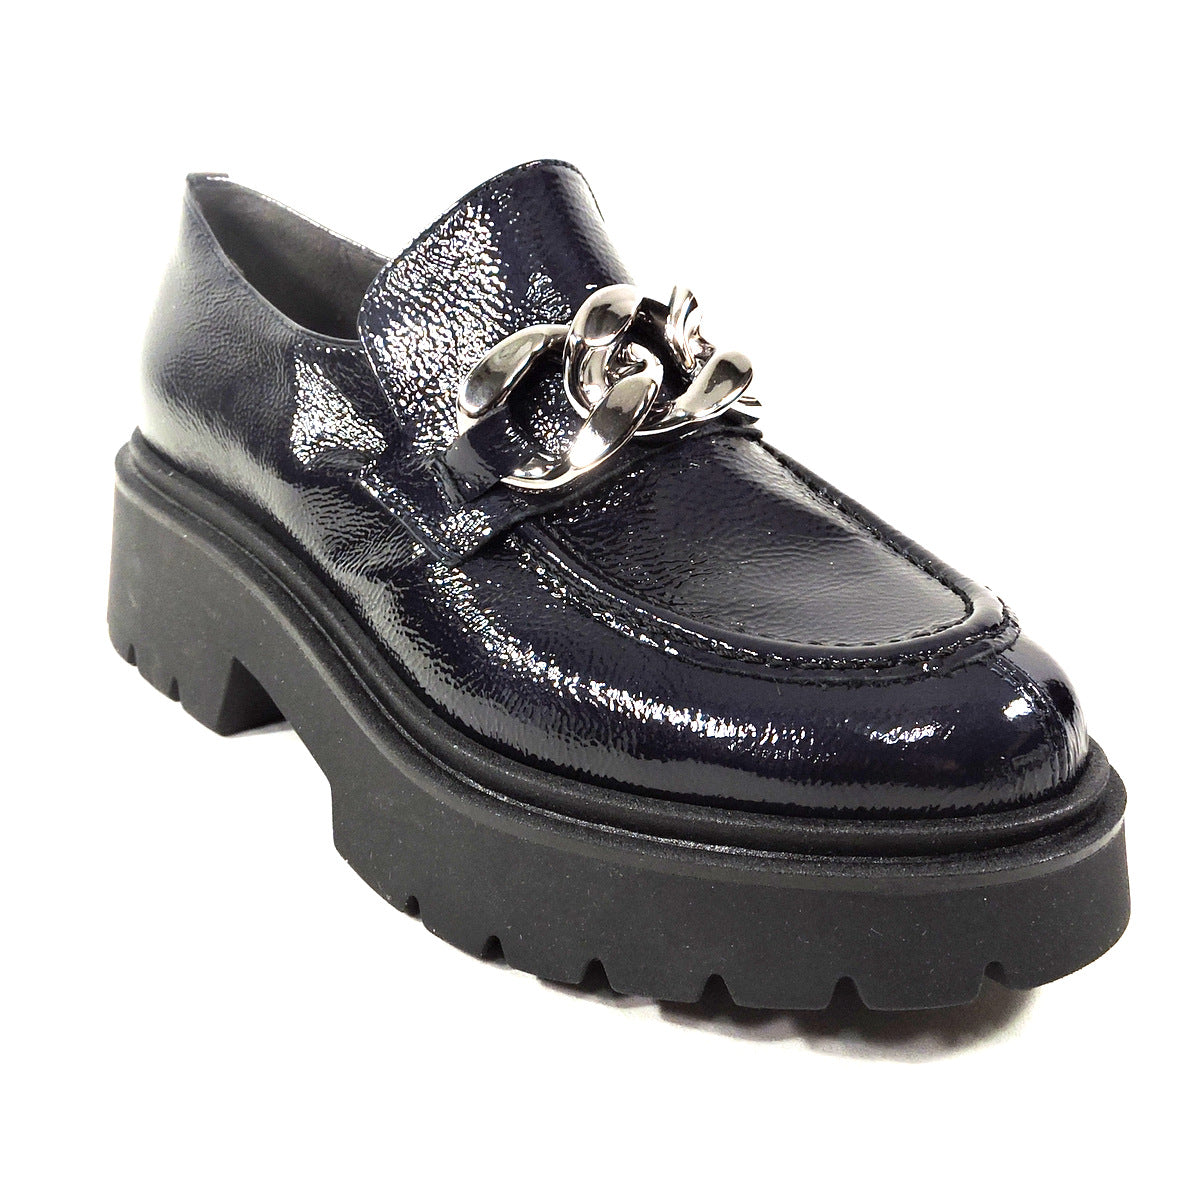 SOFFICE SOGNO 🇮🇹 WOMEN'S NAVY BLUE PATENT LEATHER FASHION LOAFERS